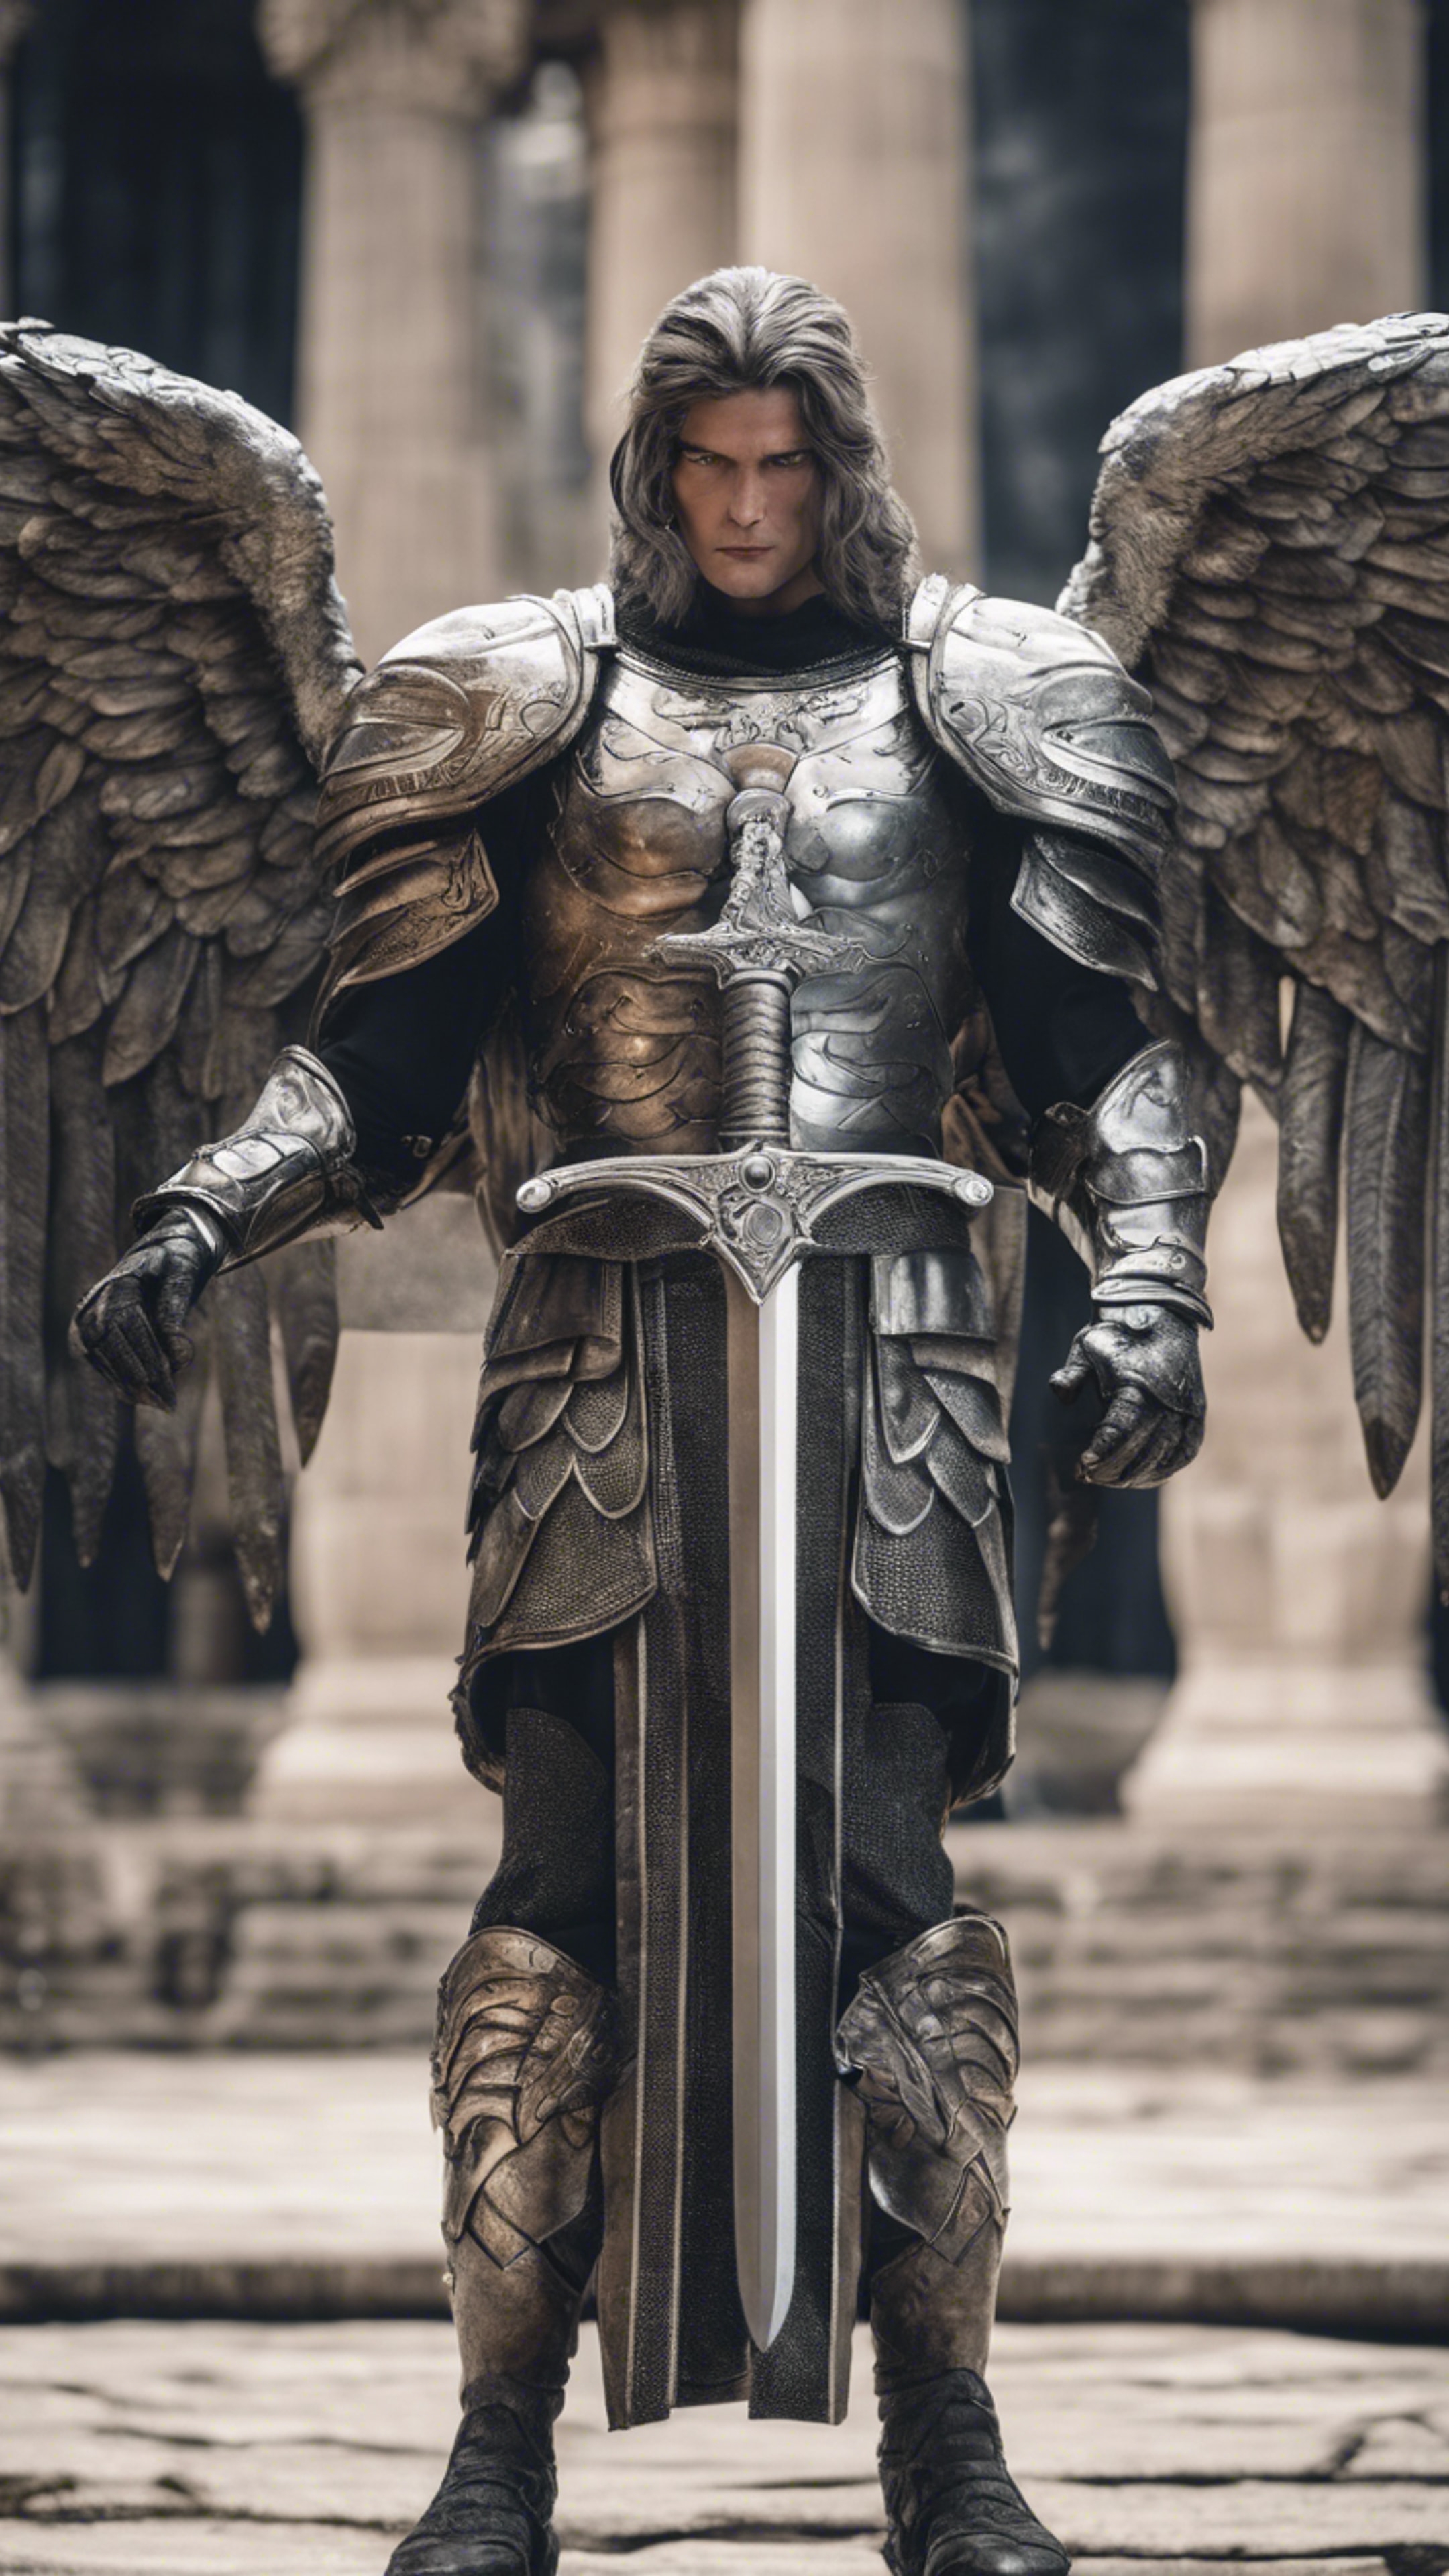 A strong archangel with a great silver sword in battle stance. Wallpaper[1419cc1cb5fd40c69a58]